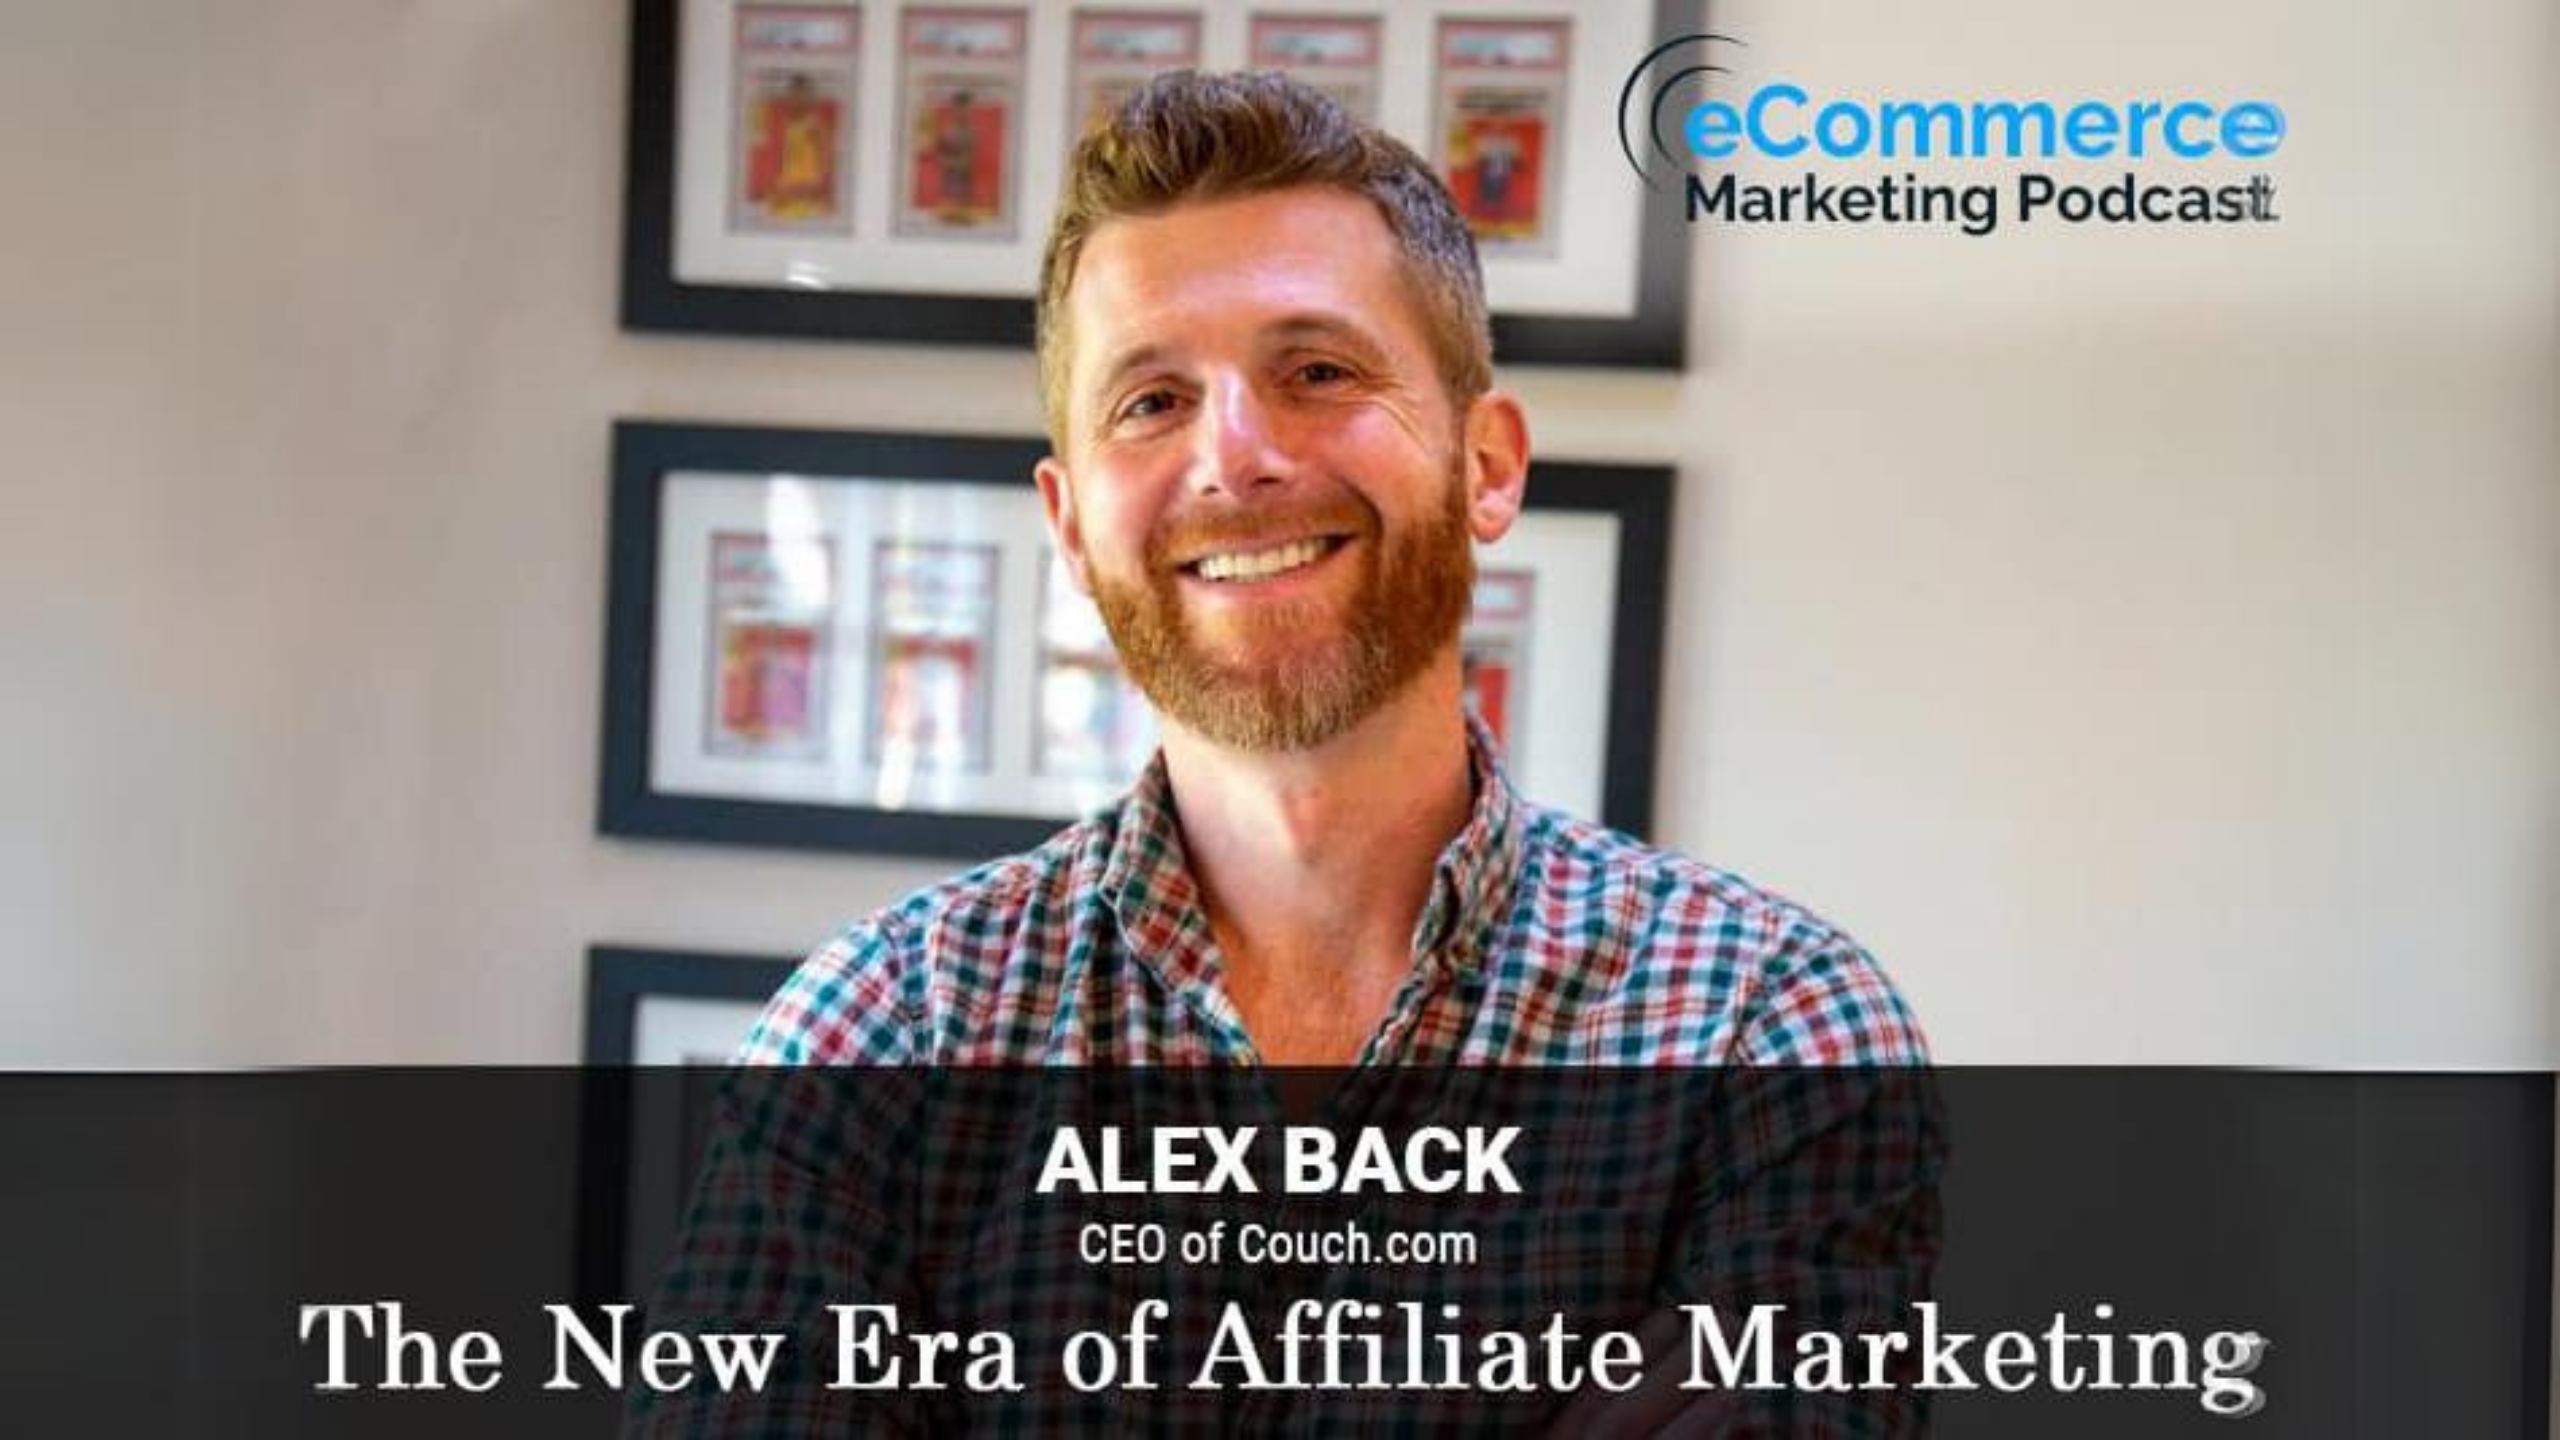 A smiling man with a beard, wearing a plaid shirt, stands in front of a wall with framed pictures. Text on the image: "eCommerce Marketing Podcast," "Alex Back, CEO of Couch.com," and "The New Era of Affiliate Marketing.